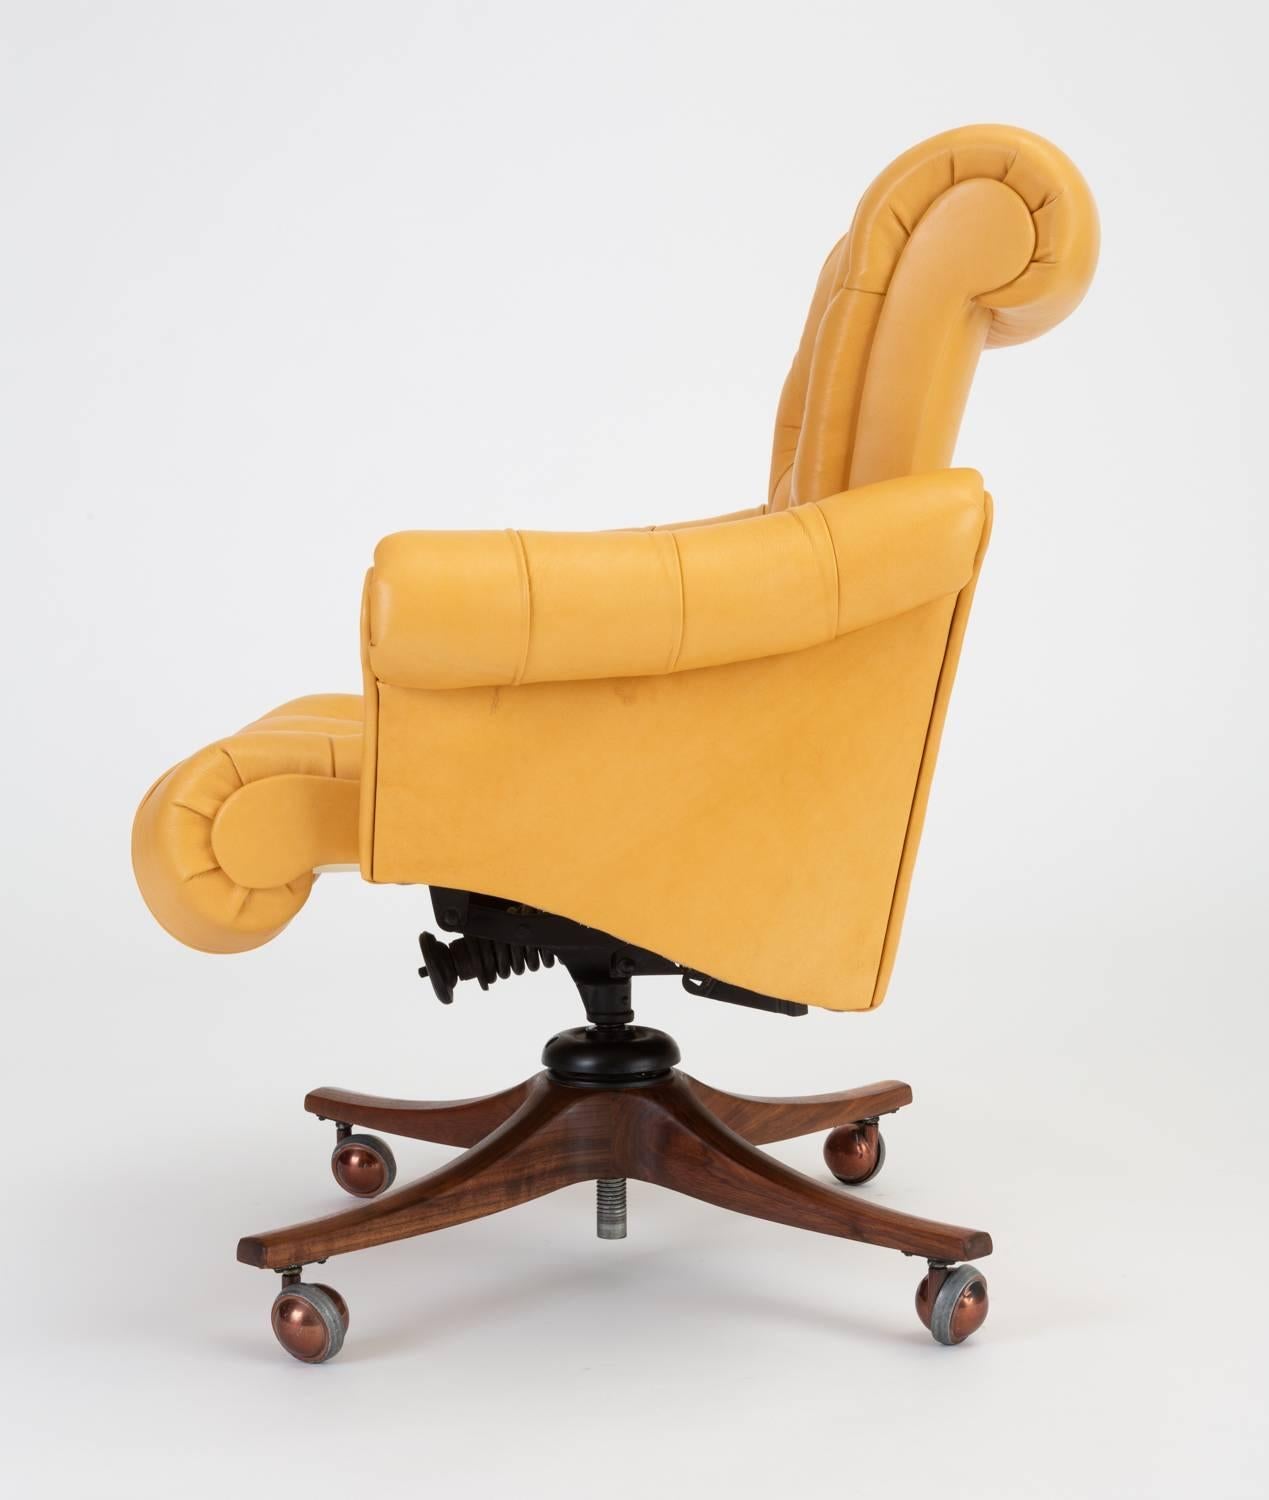 Model 932 “In Clover” Executive Office Chair by Edward Wormley for Dunbar 3